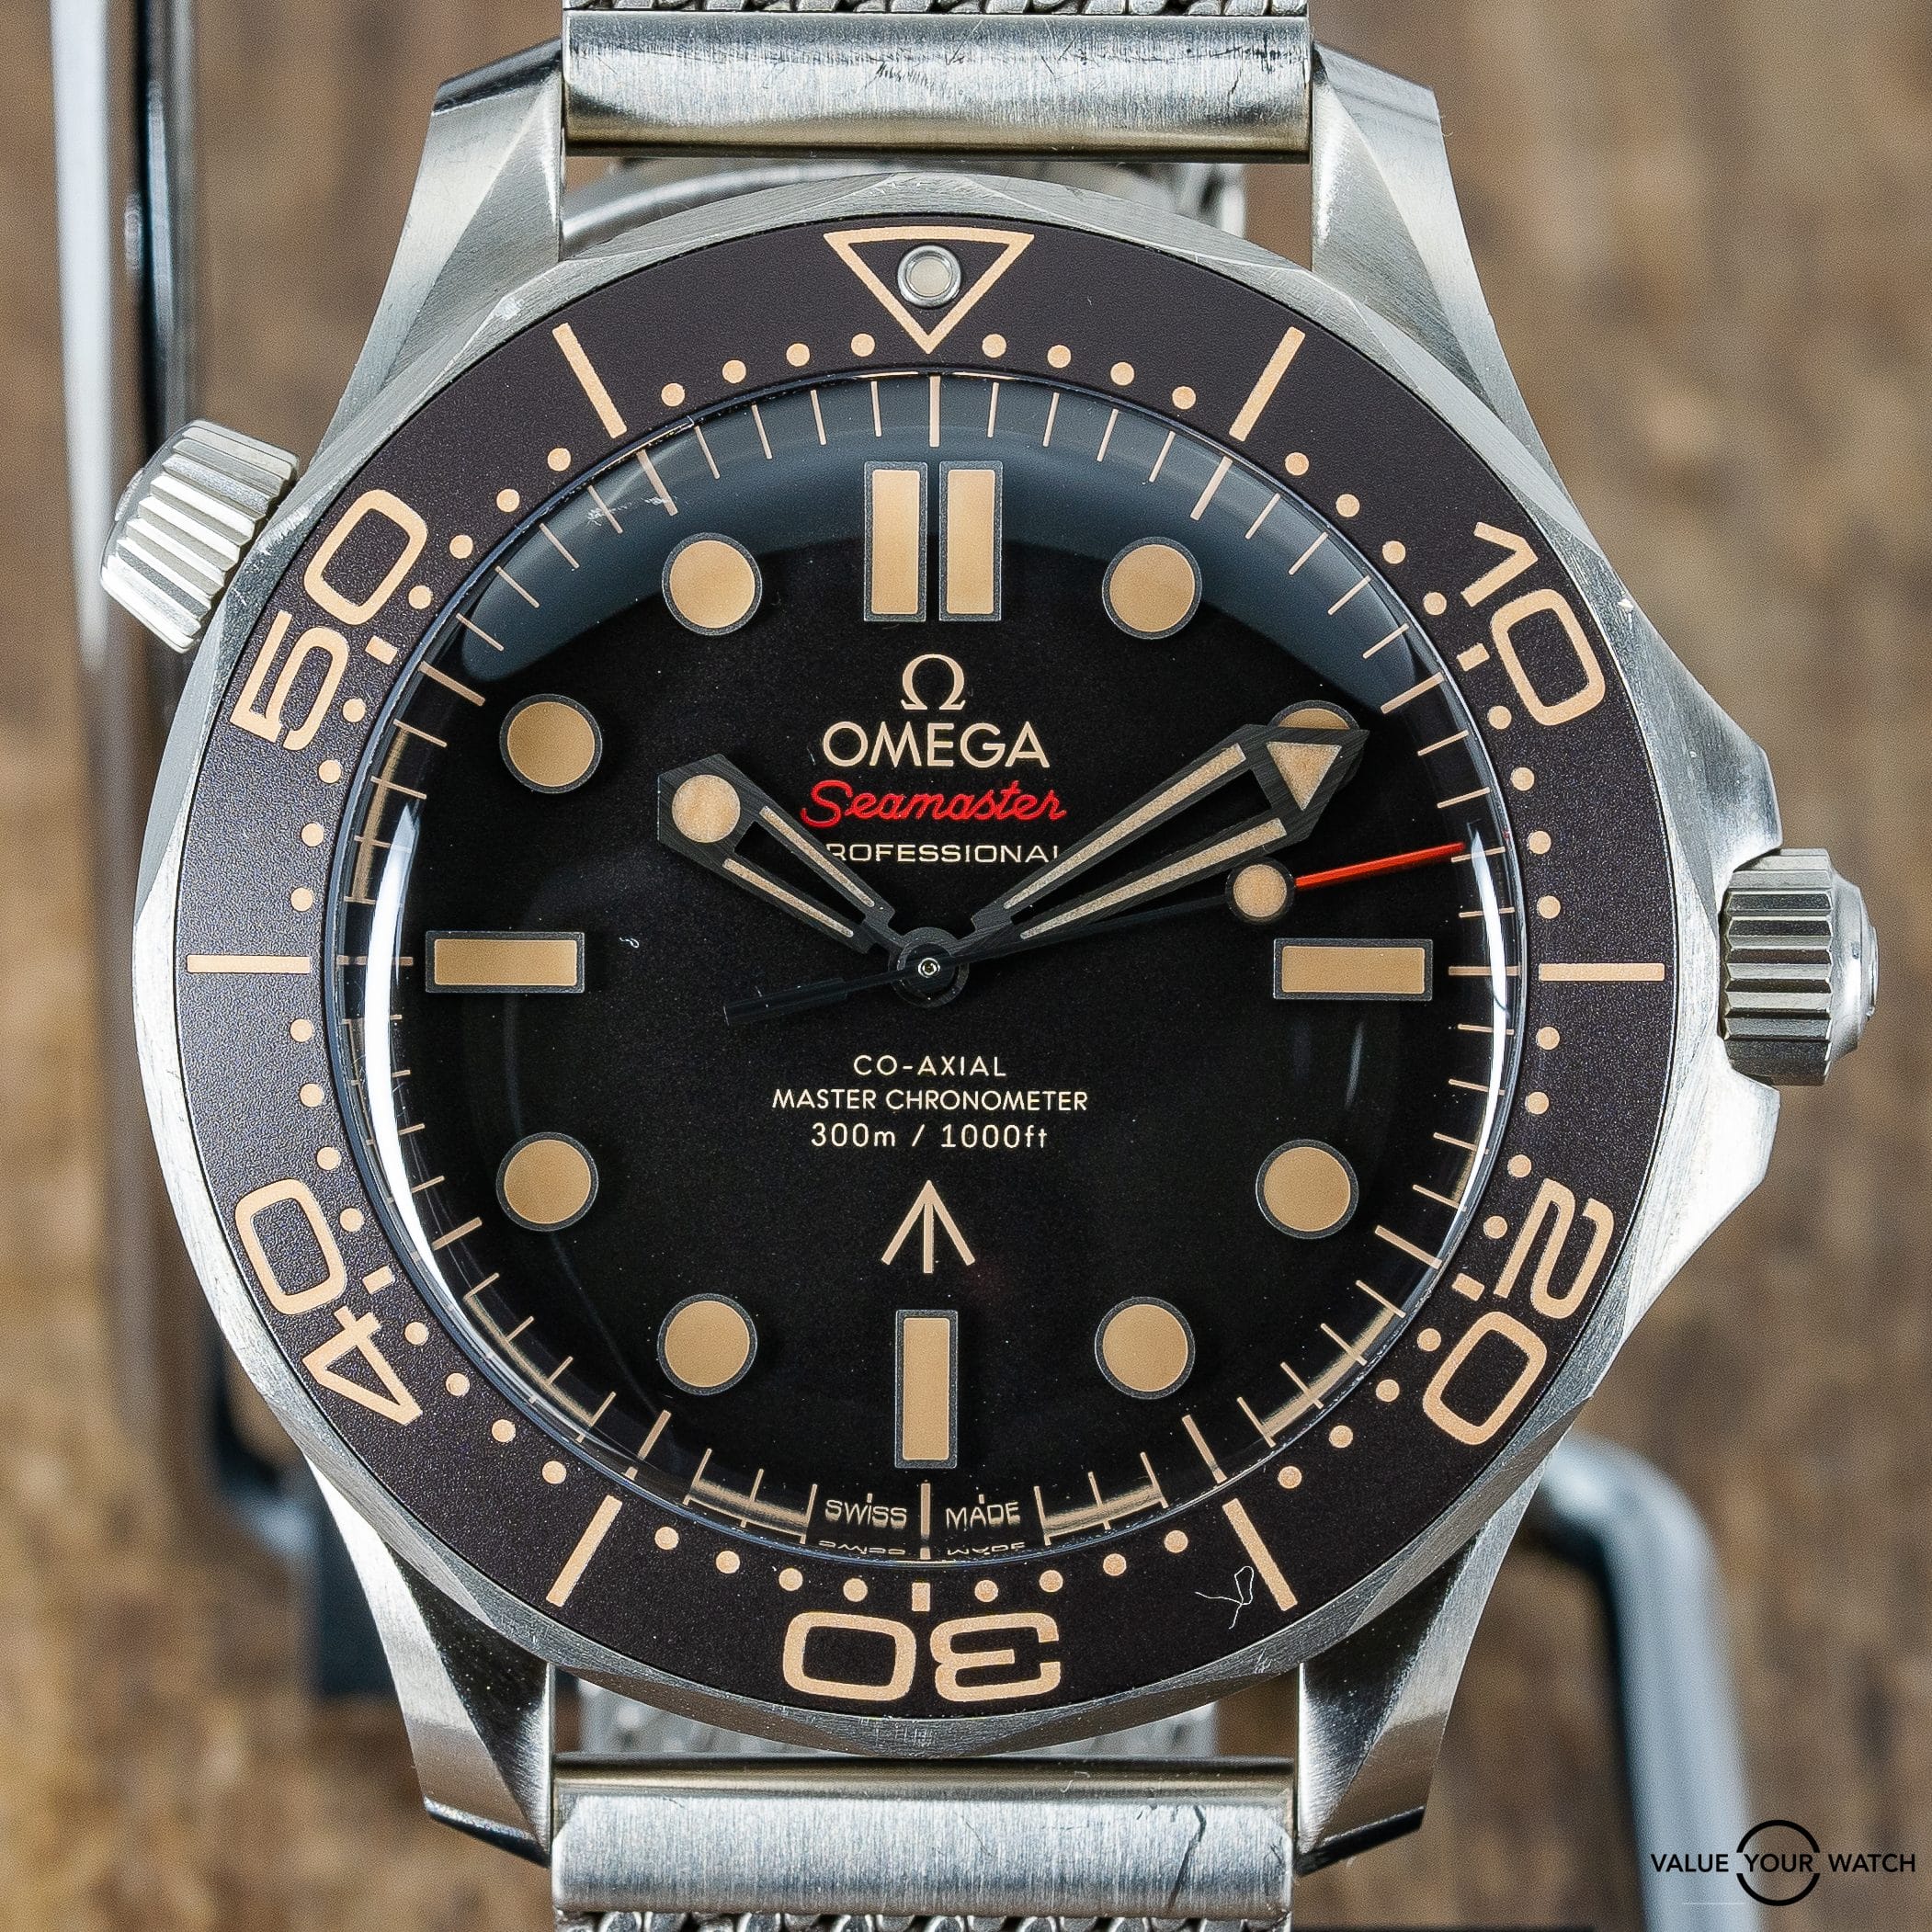 OMEGA Seamaster Diver 300M 007 No Time To Die Titanium Watch 210.90.42.20.01.001 Box and Papers